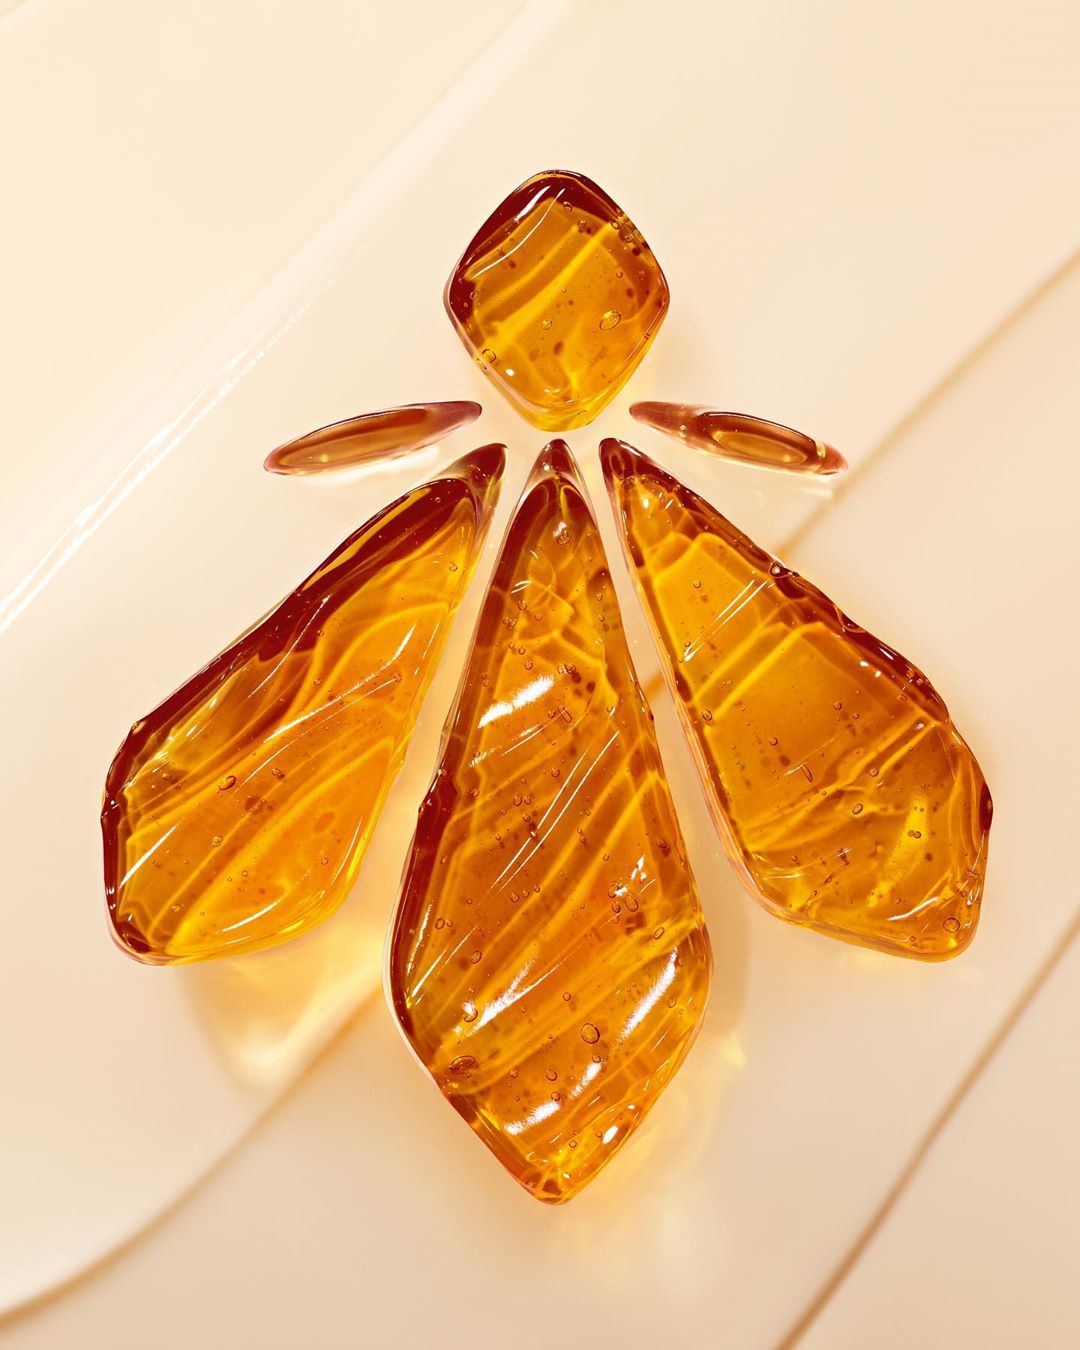 Guerlain - Abeille Royale Hands: a new, luxurious ritual imagined by Guerlain, harnessing the power of rich honey concentrate.

Abeille Royale Soft Hands Hygiene Gel purifies and cleans, while the ult...